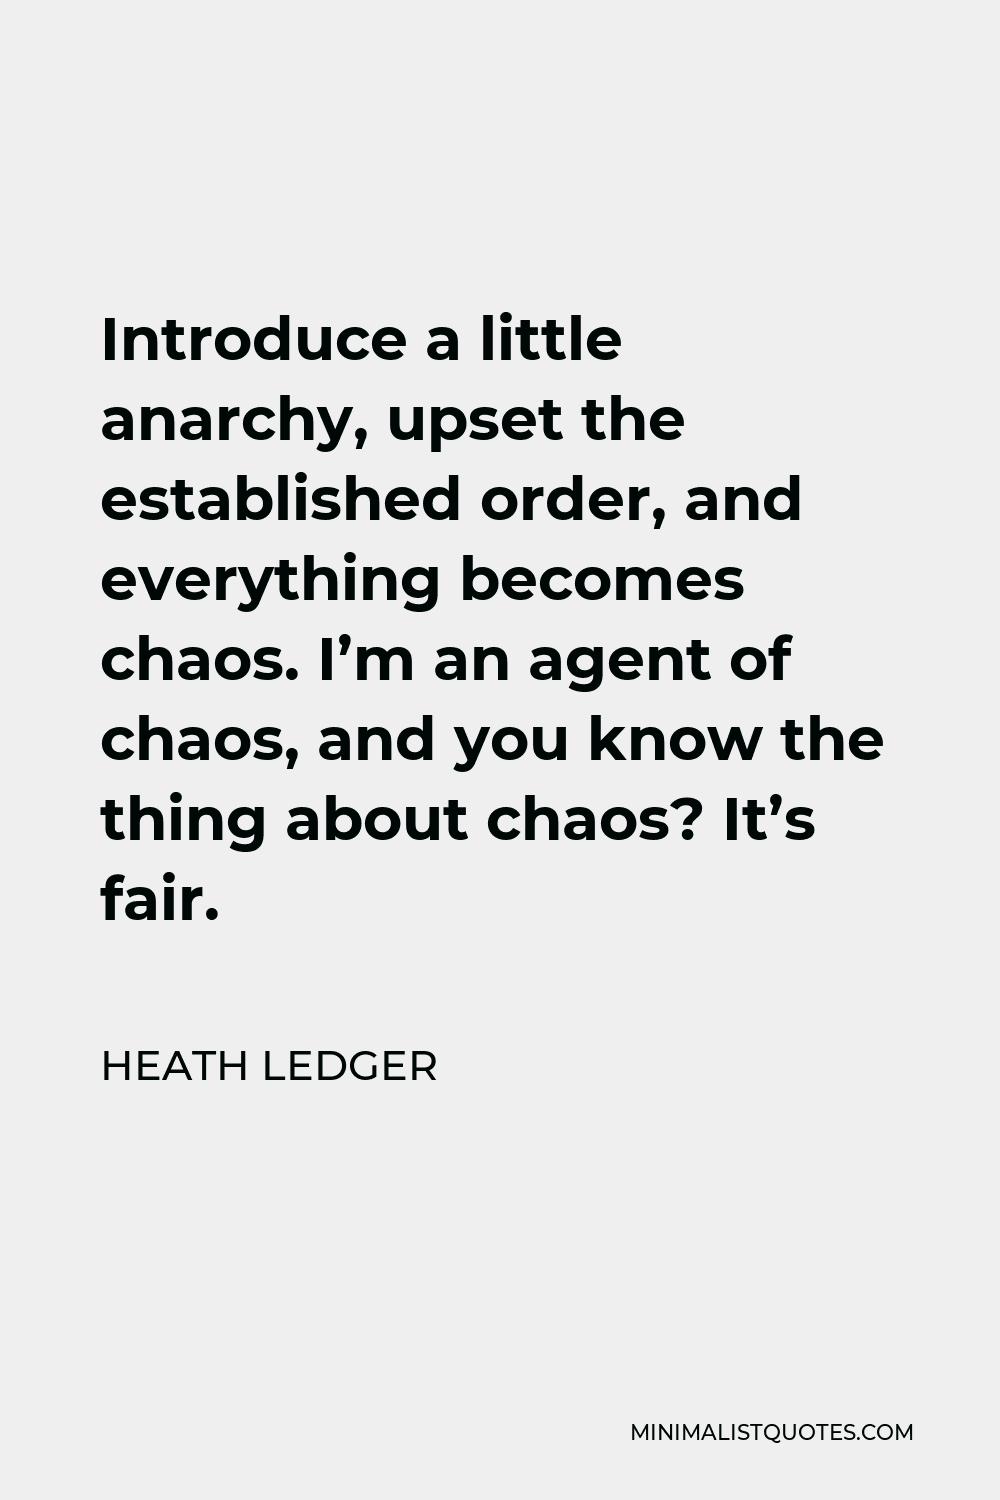 Heath Ledger Quote - Introduce a little anarchy, upset the established order, and everything becomes chaos. I’m an agent of chaos, and you know the thing about chaos? It’s fair.